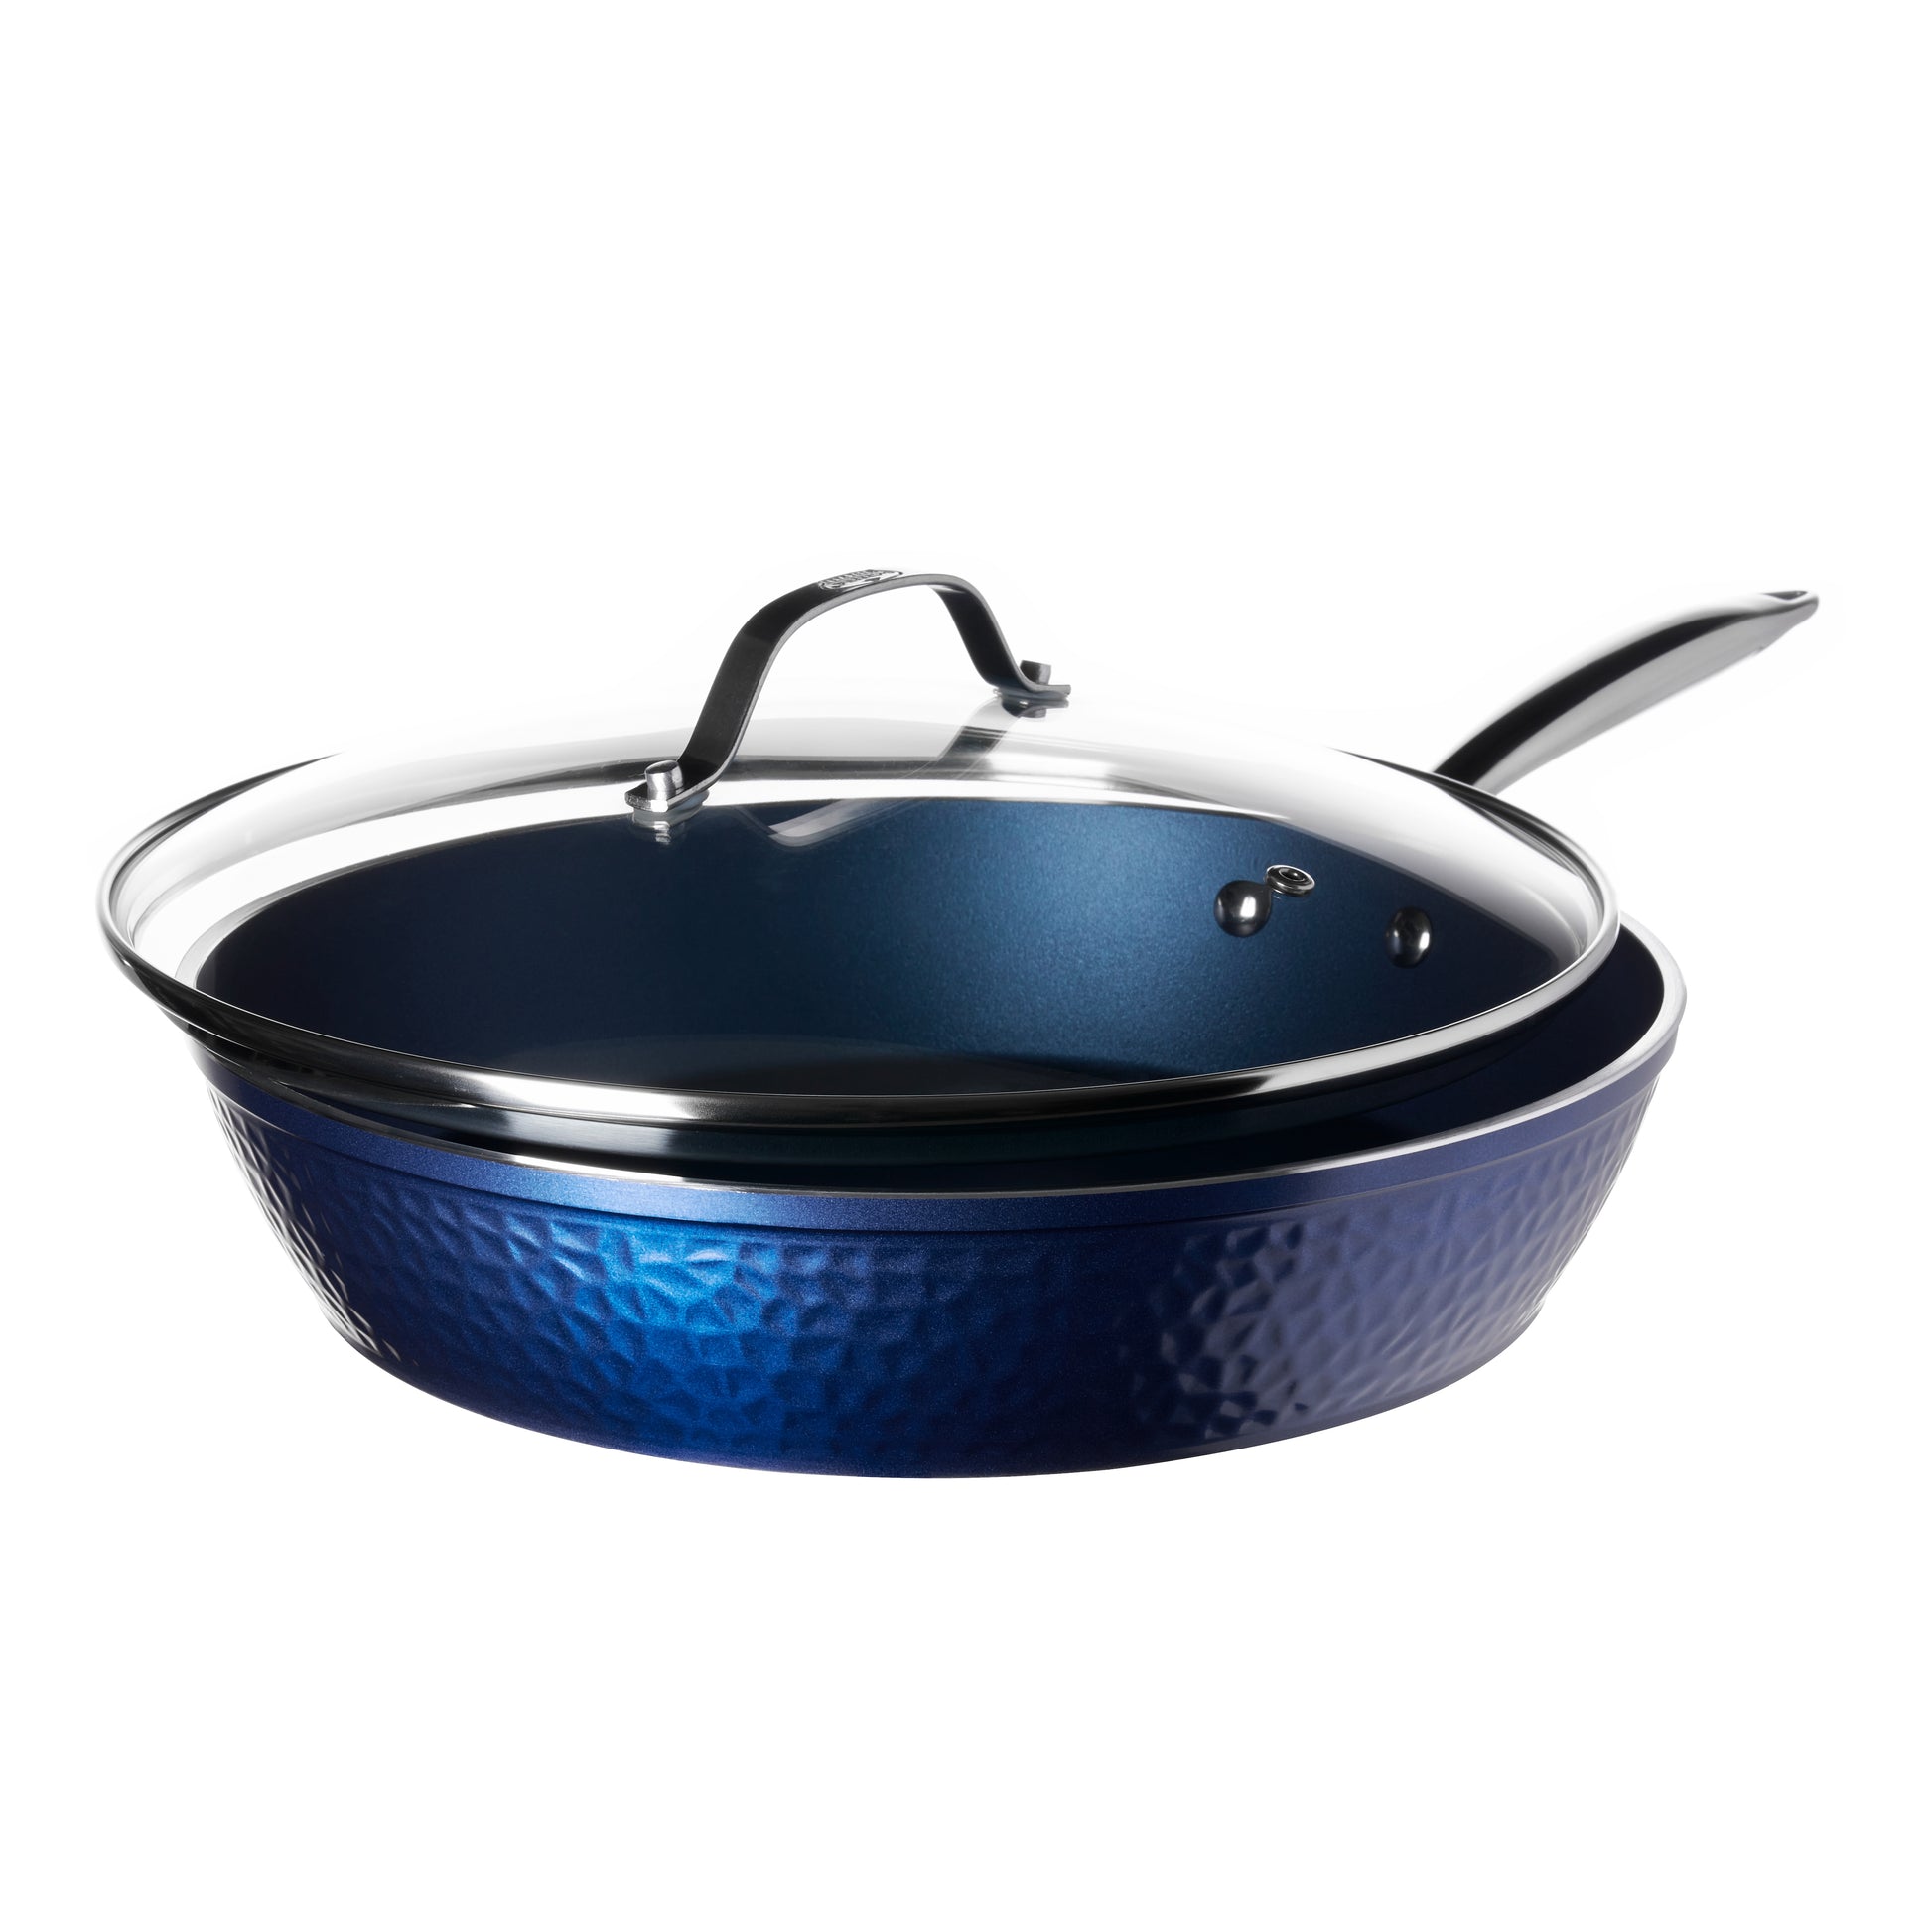  MsMk Non stick frying pan set with lid Blue, 12-inch